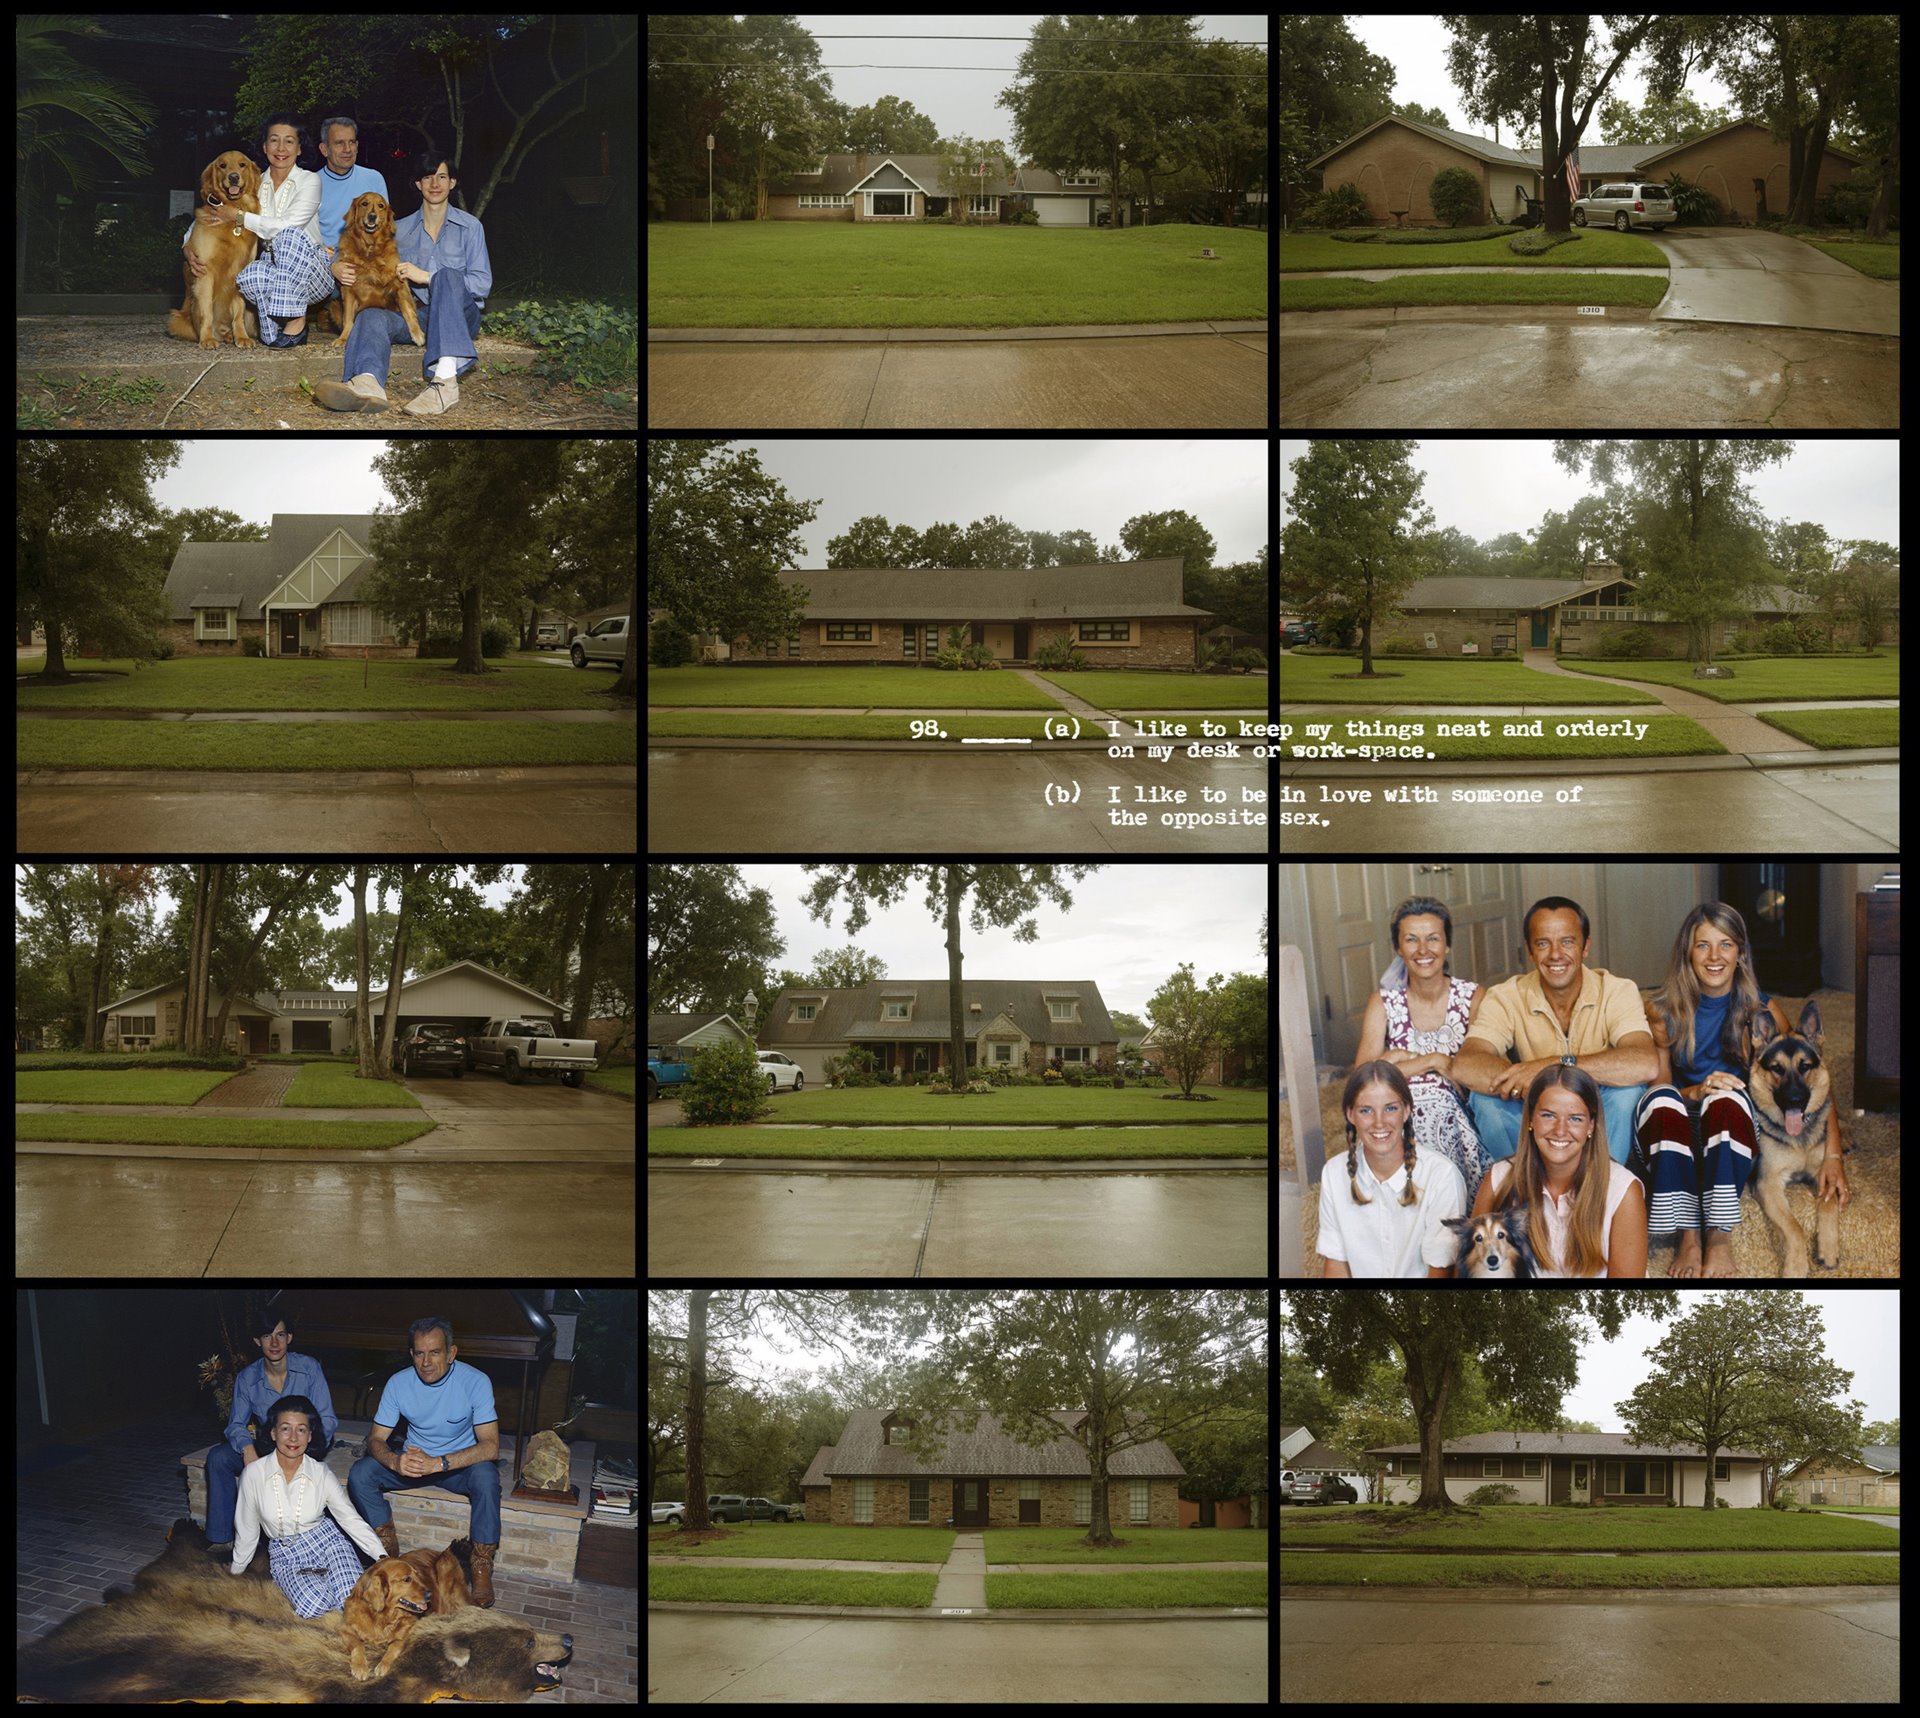 Text excerpted from the Edwards Personal Preference Schedule (EPPS) overlaid on a grid of photos of NASA astronaut family homes and portraits. EPPS was a psychological test used to evaluate astronaut candidates in NASA&rsquo;s Mercury, Gemini, and Apollo programs. Most of the Mercury, Gemini, and Apollo astronauts lived in the El Lago neighborhood of Houston, Texas, United States, near the Johnson Space Center. Two astronauts and their families are shown: Deke Slayton (left column), Apollo-Soyuz astronaut and the first Chief of the Astronaut Office, and Alan Shephard (left column), the first American in space.